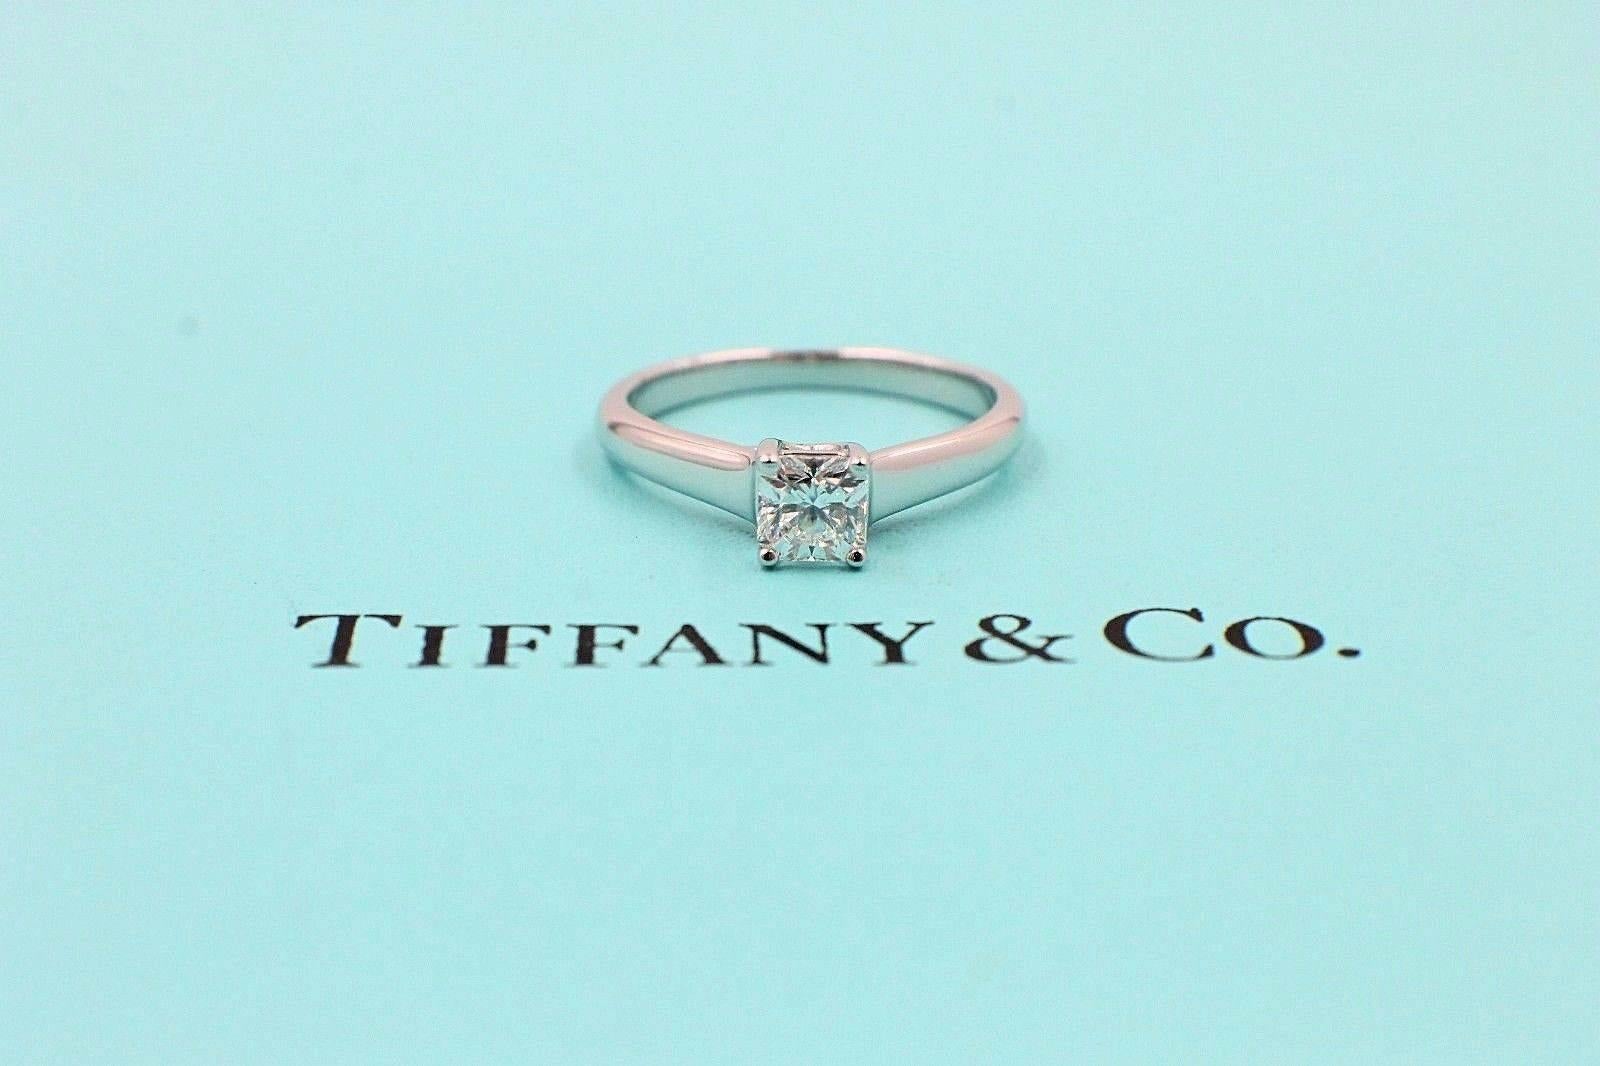 Tiffany & Co. Lucida 0.46 ct E VVS1 Diamond Platinum Engagement Ring Box & Cert In Excellent Condition For Sale In San Diego, CA